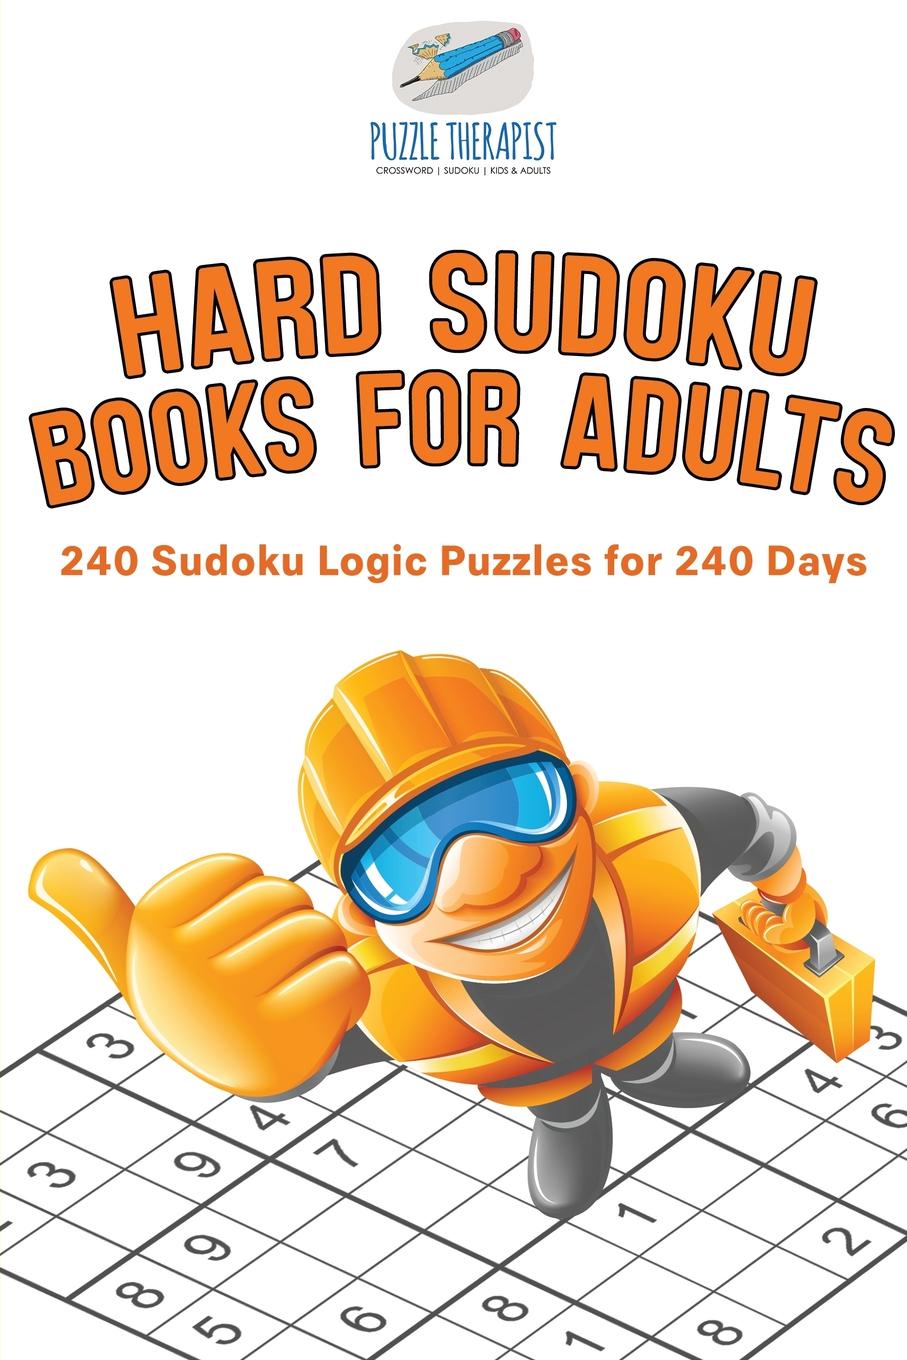 Puzzle Therapist Hard Sudoku Books for Adults . 240 Sudoku Logic Puzzles for 240 Days